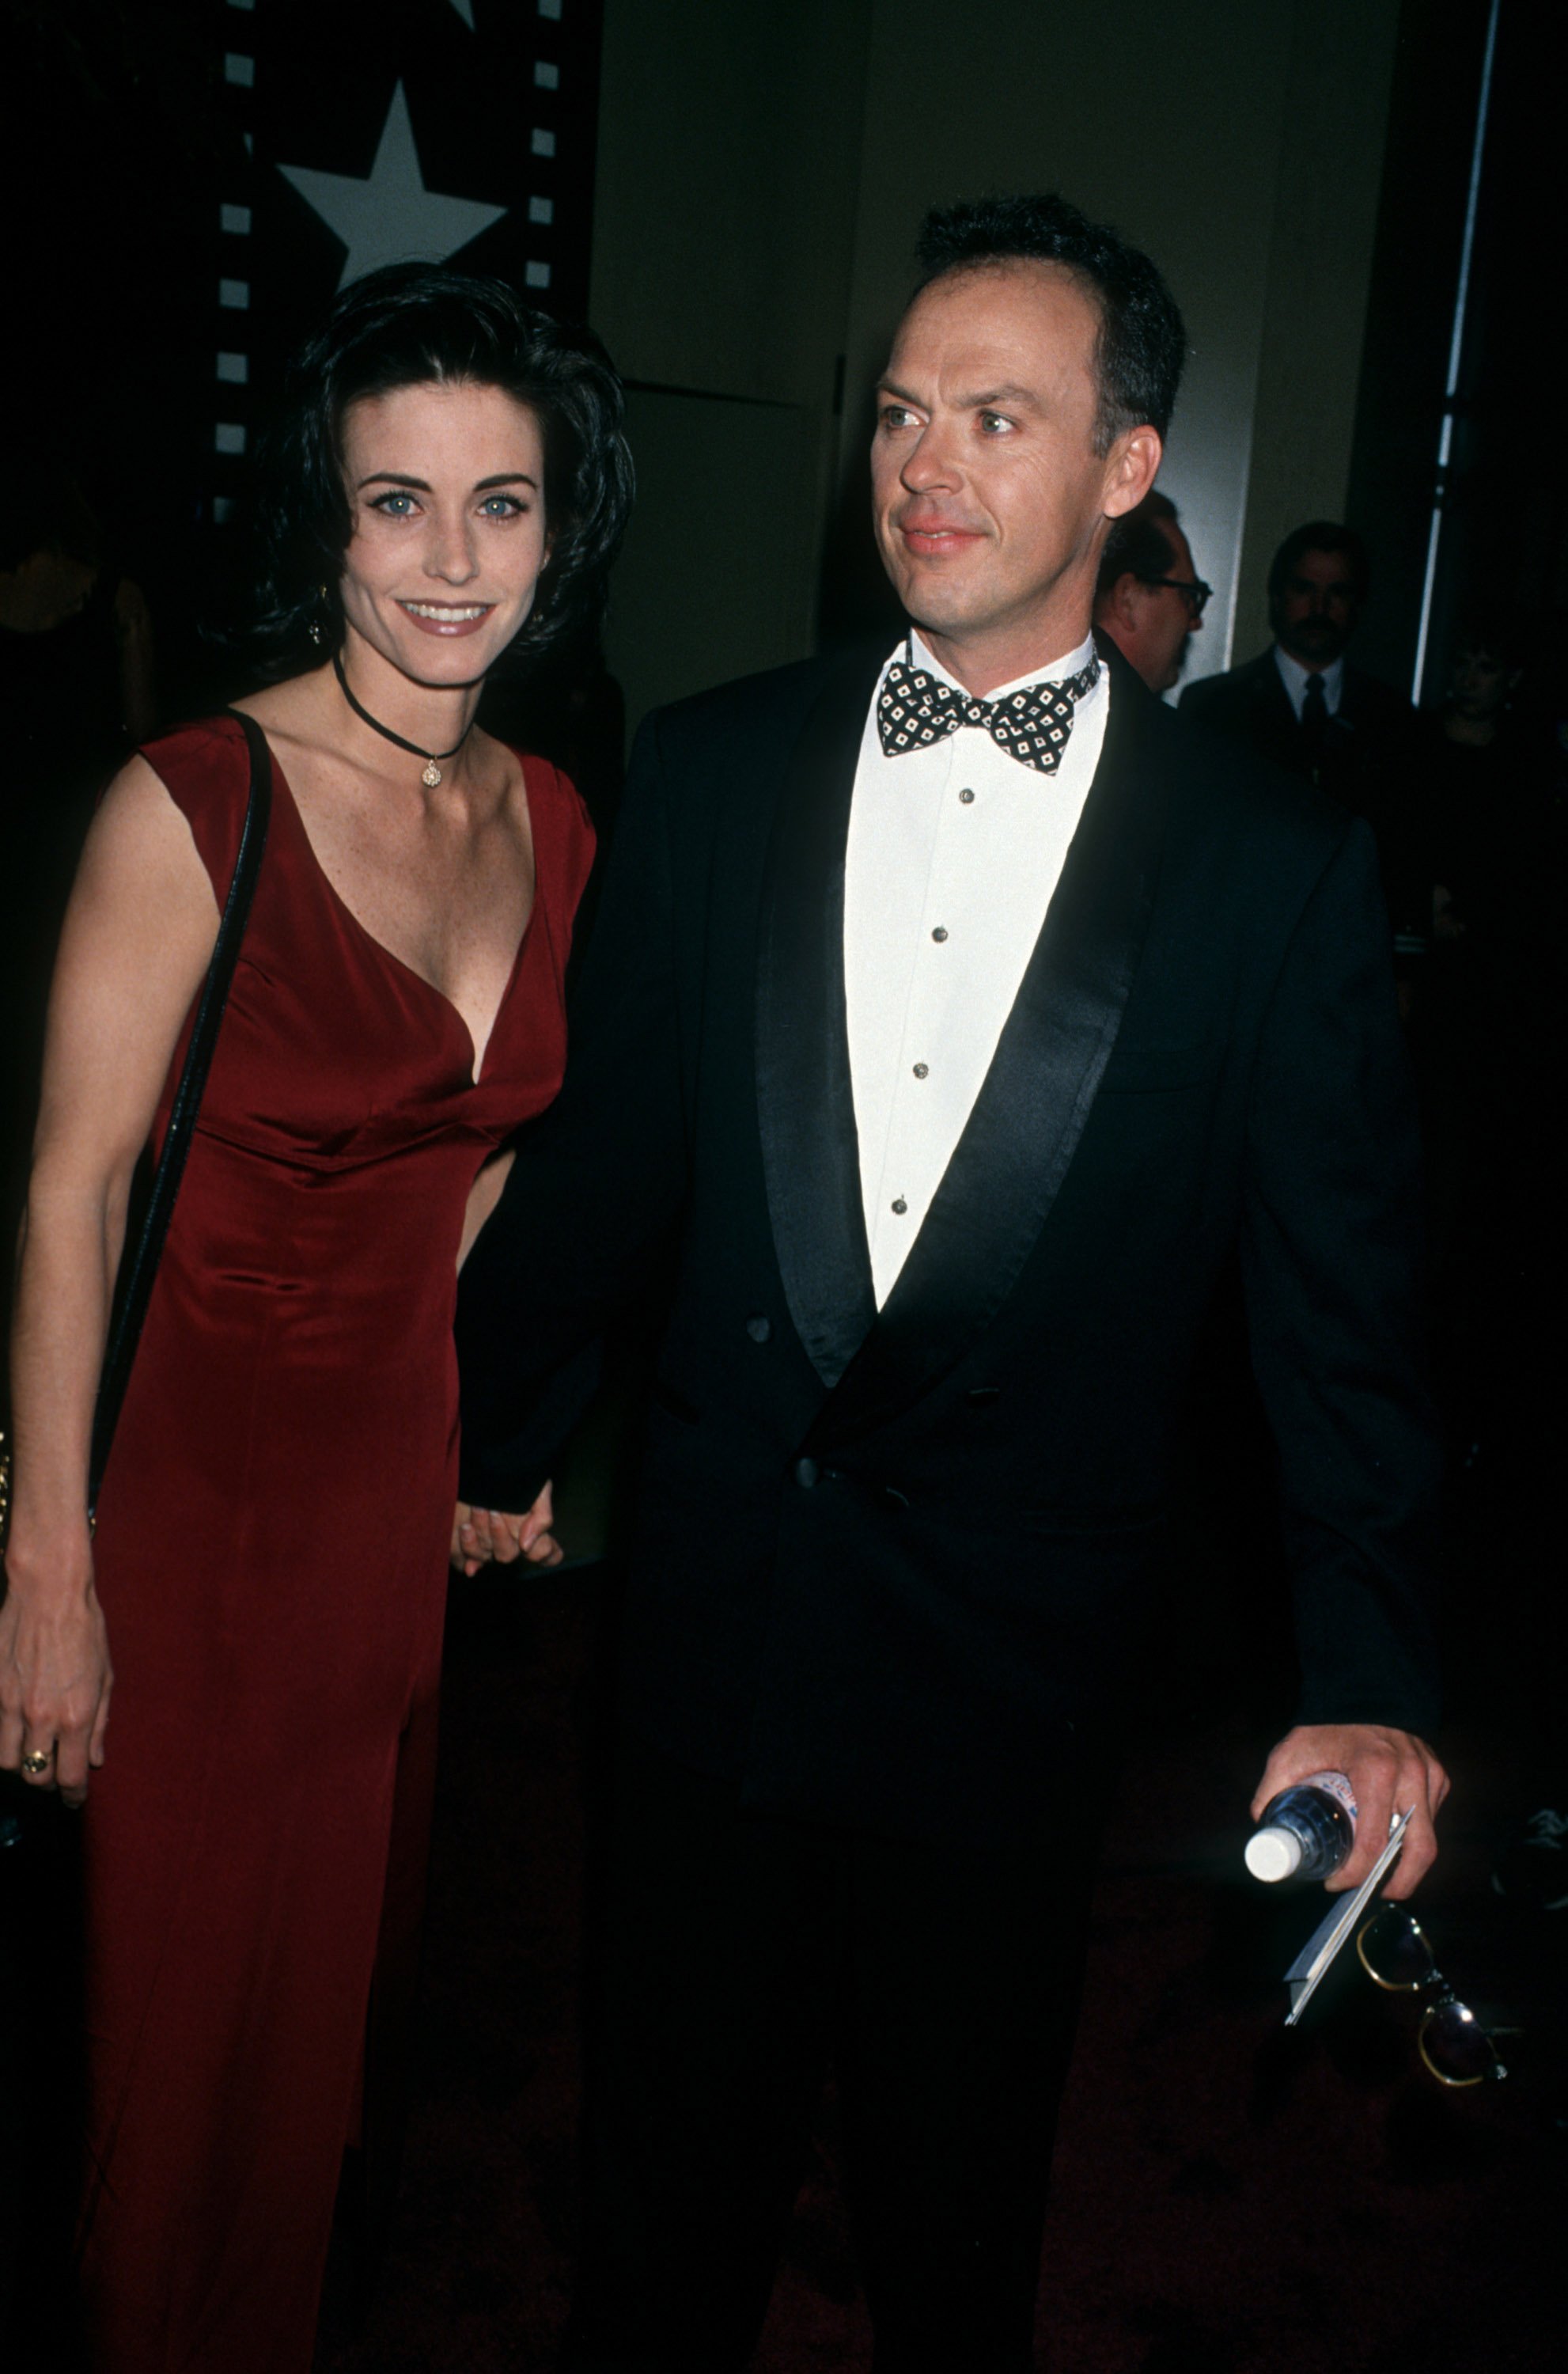 Michael Keaton and Courteney Cox at the 22nd Annual American Film Institute Lifetime Achievement Awards at the Beverly Hilton Hotel in Beverly Hills, California, on March 3, 1994. | Source: Getty Images